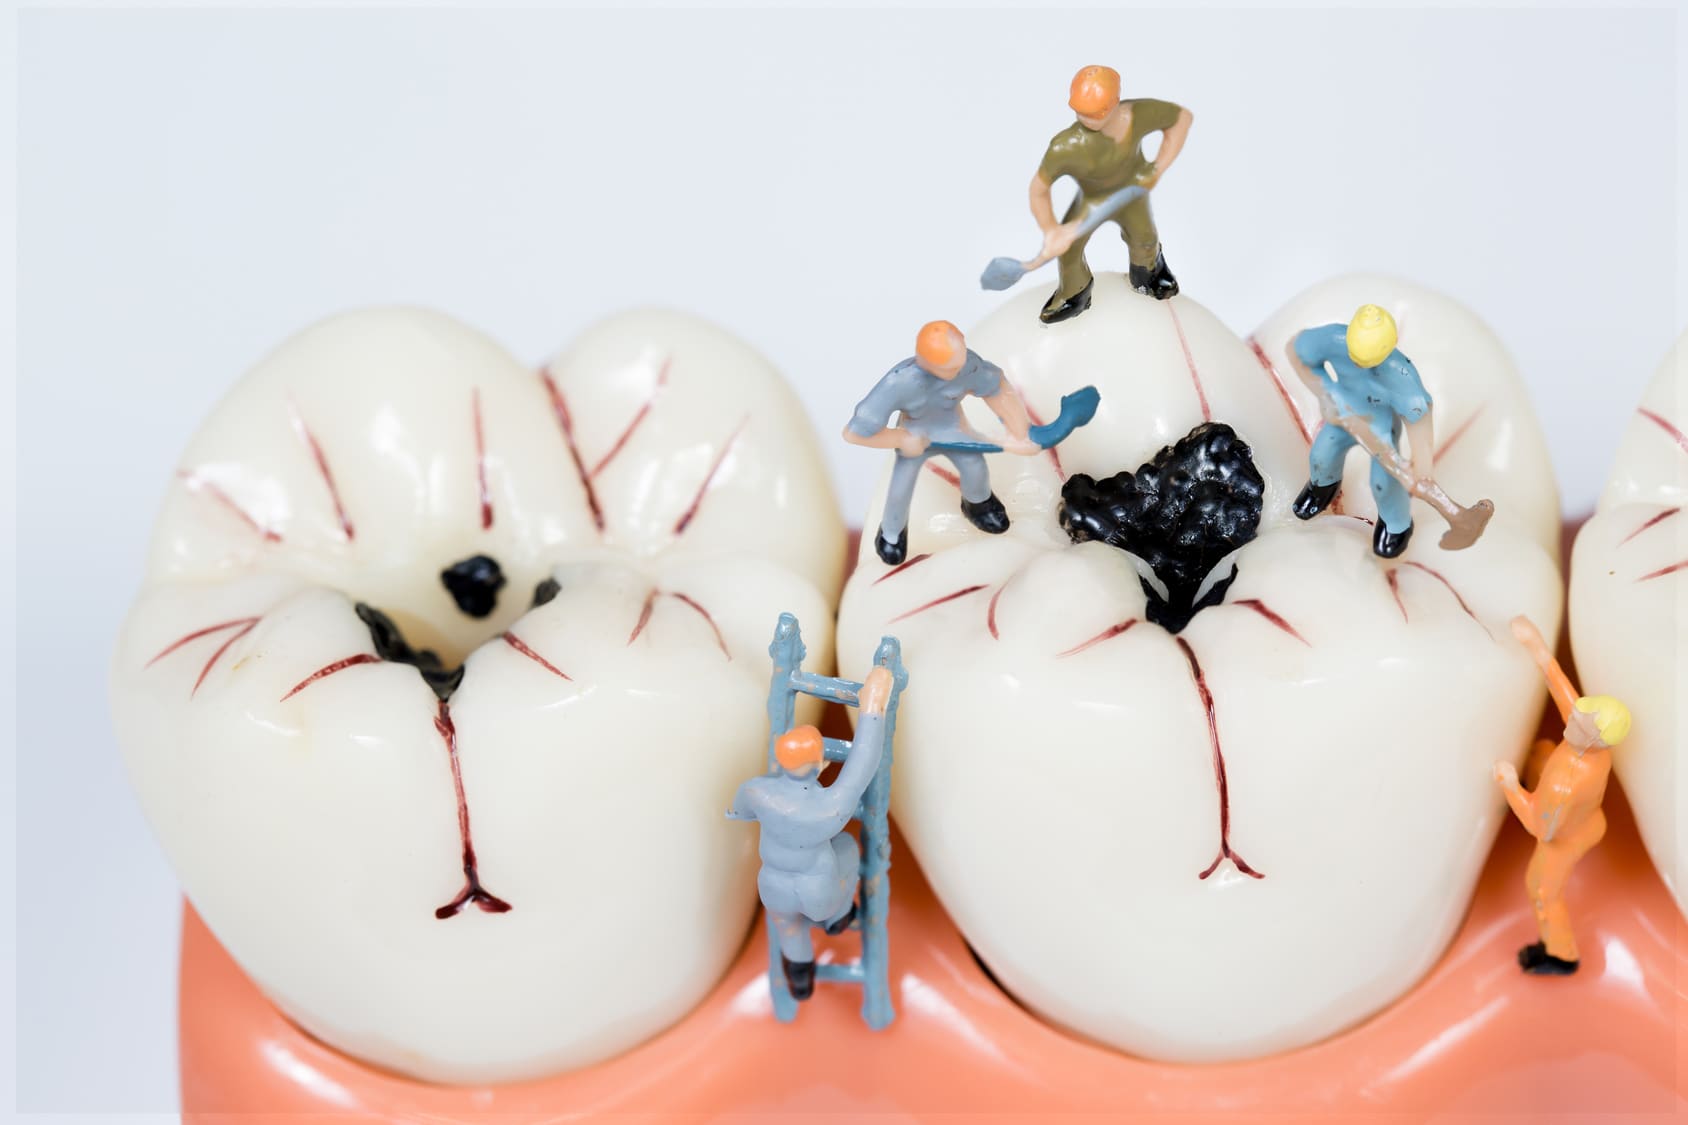 miniature people clean tooth model,medical concept